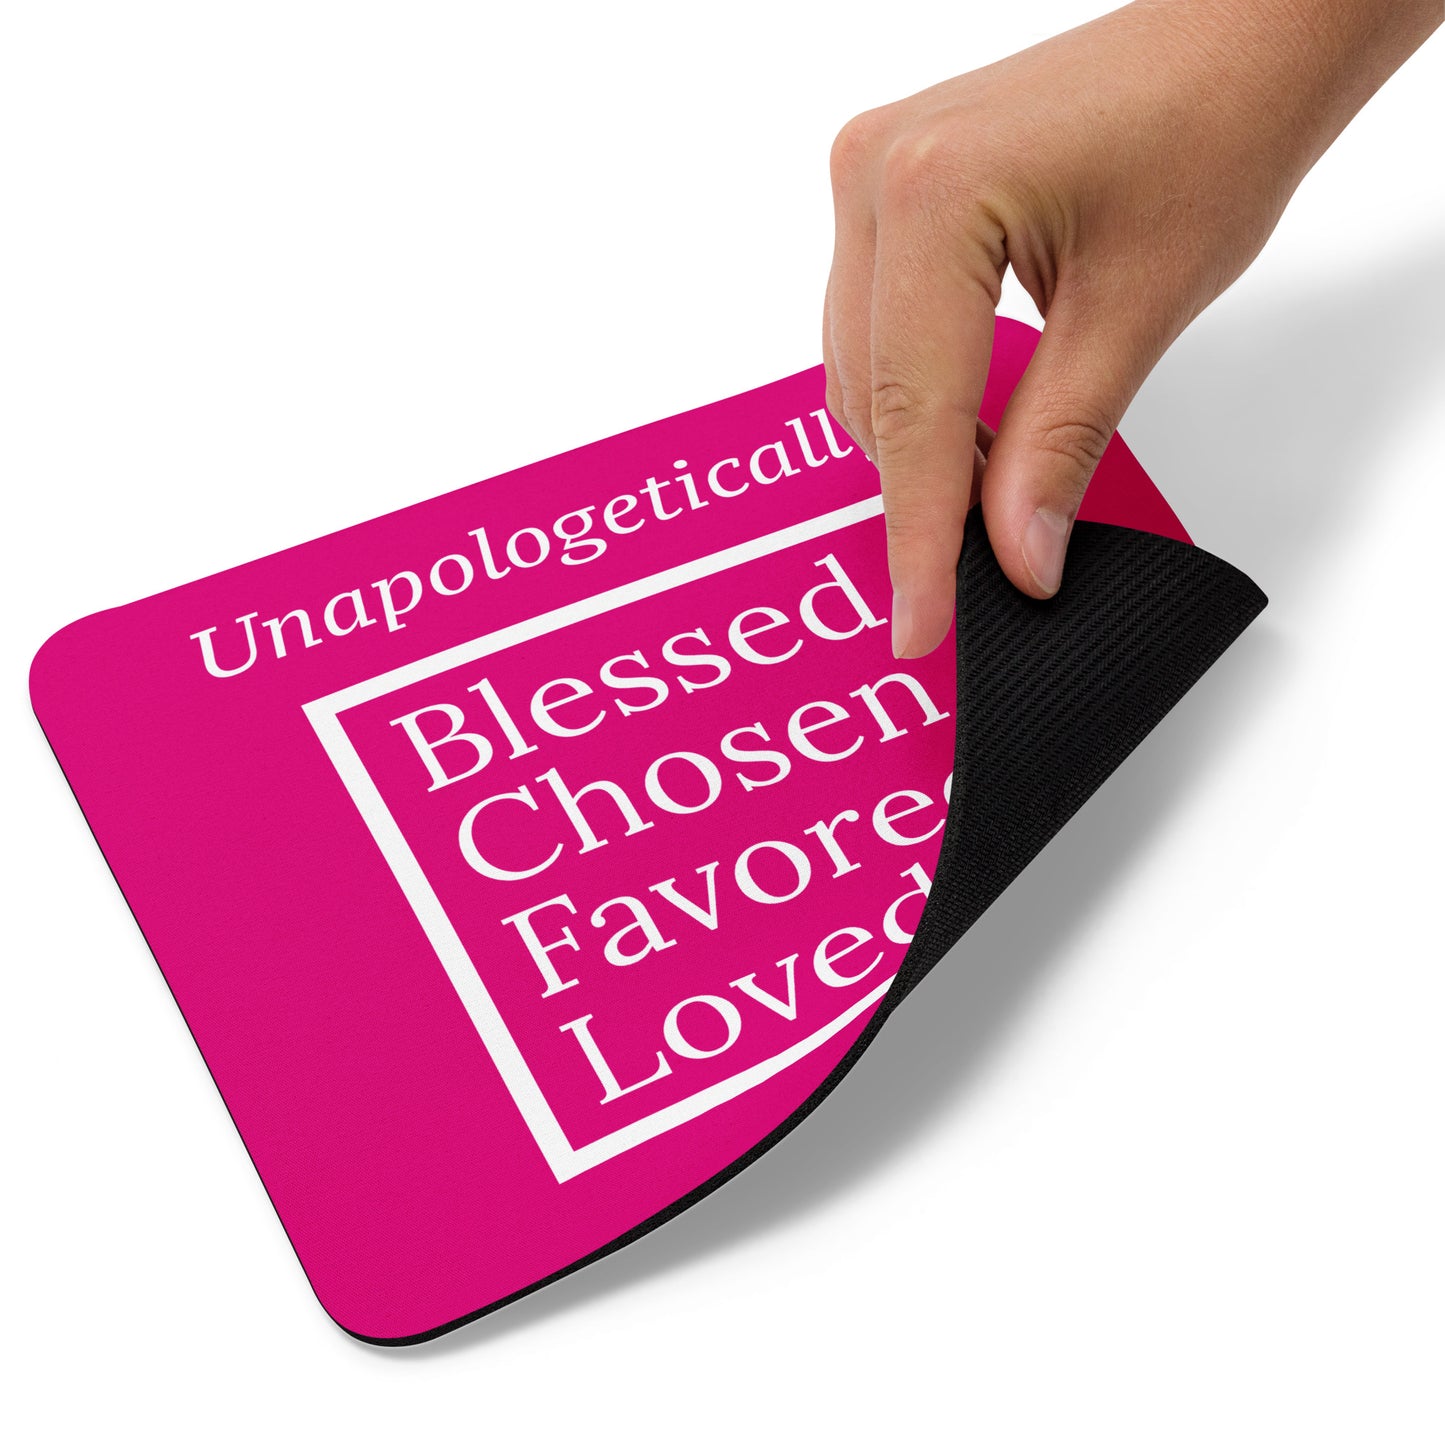 Inspirational Mouse pad - Unapologetic (bright pink)